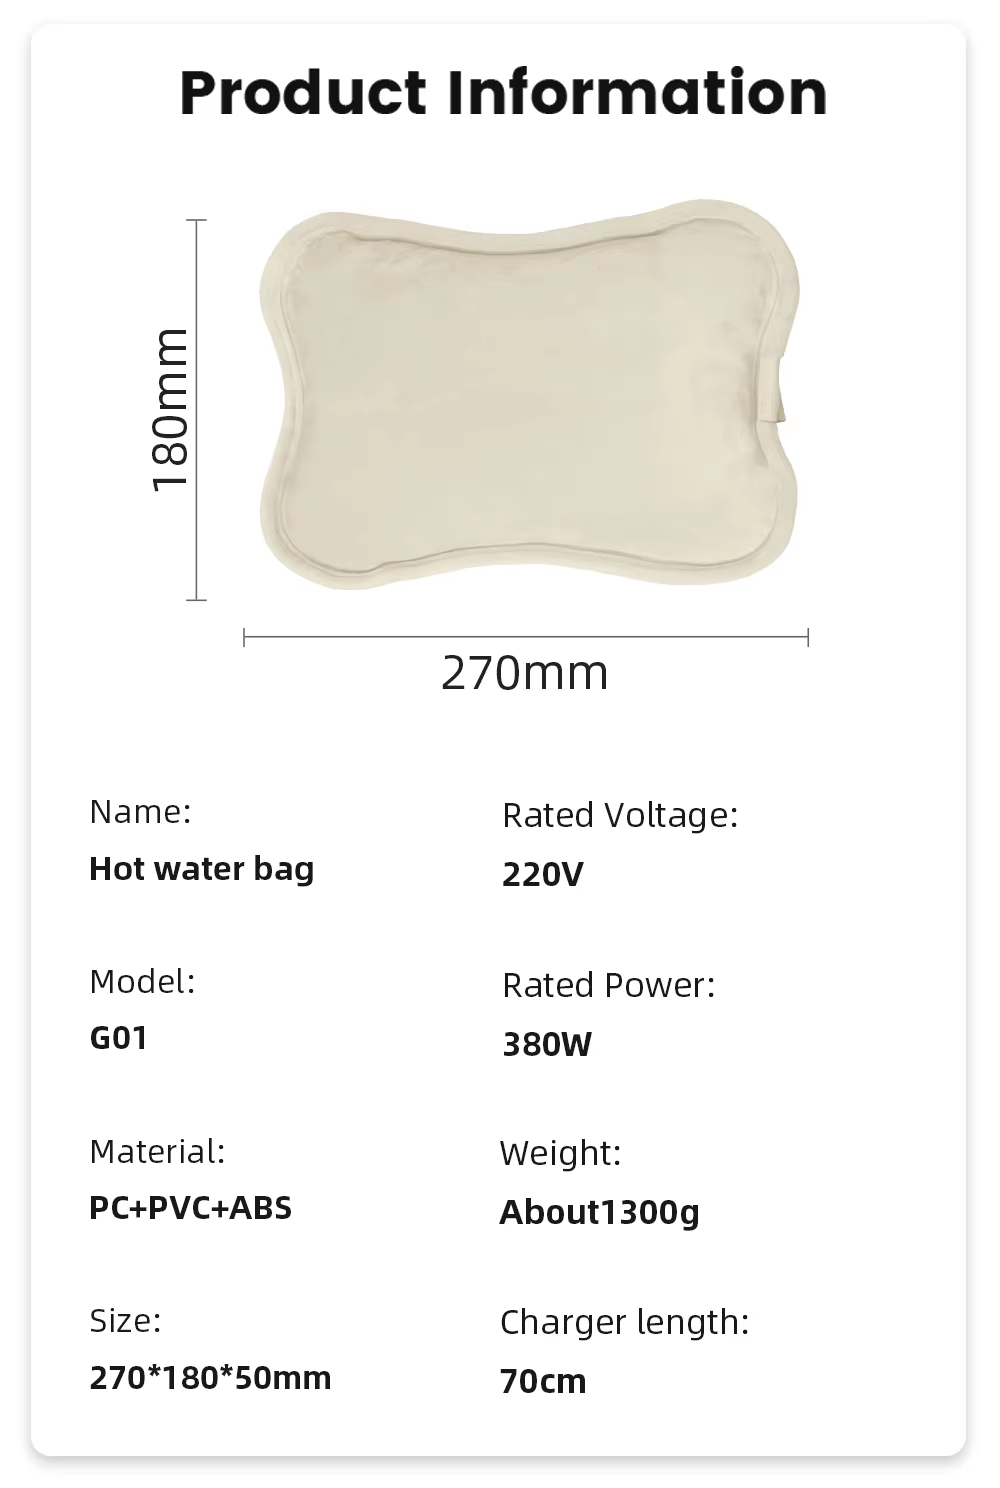 Electric heating bag product information